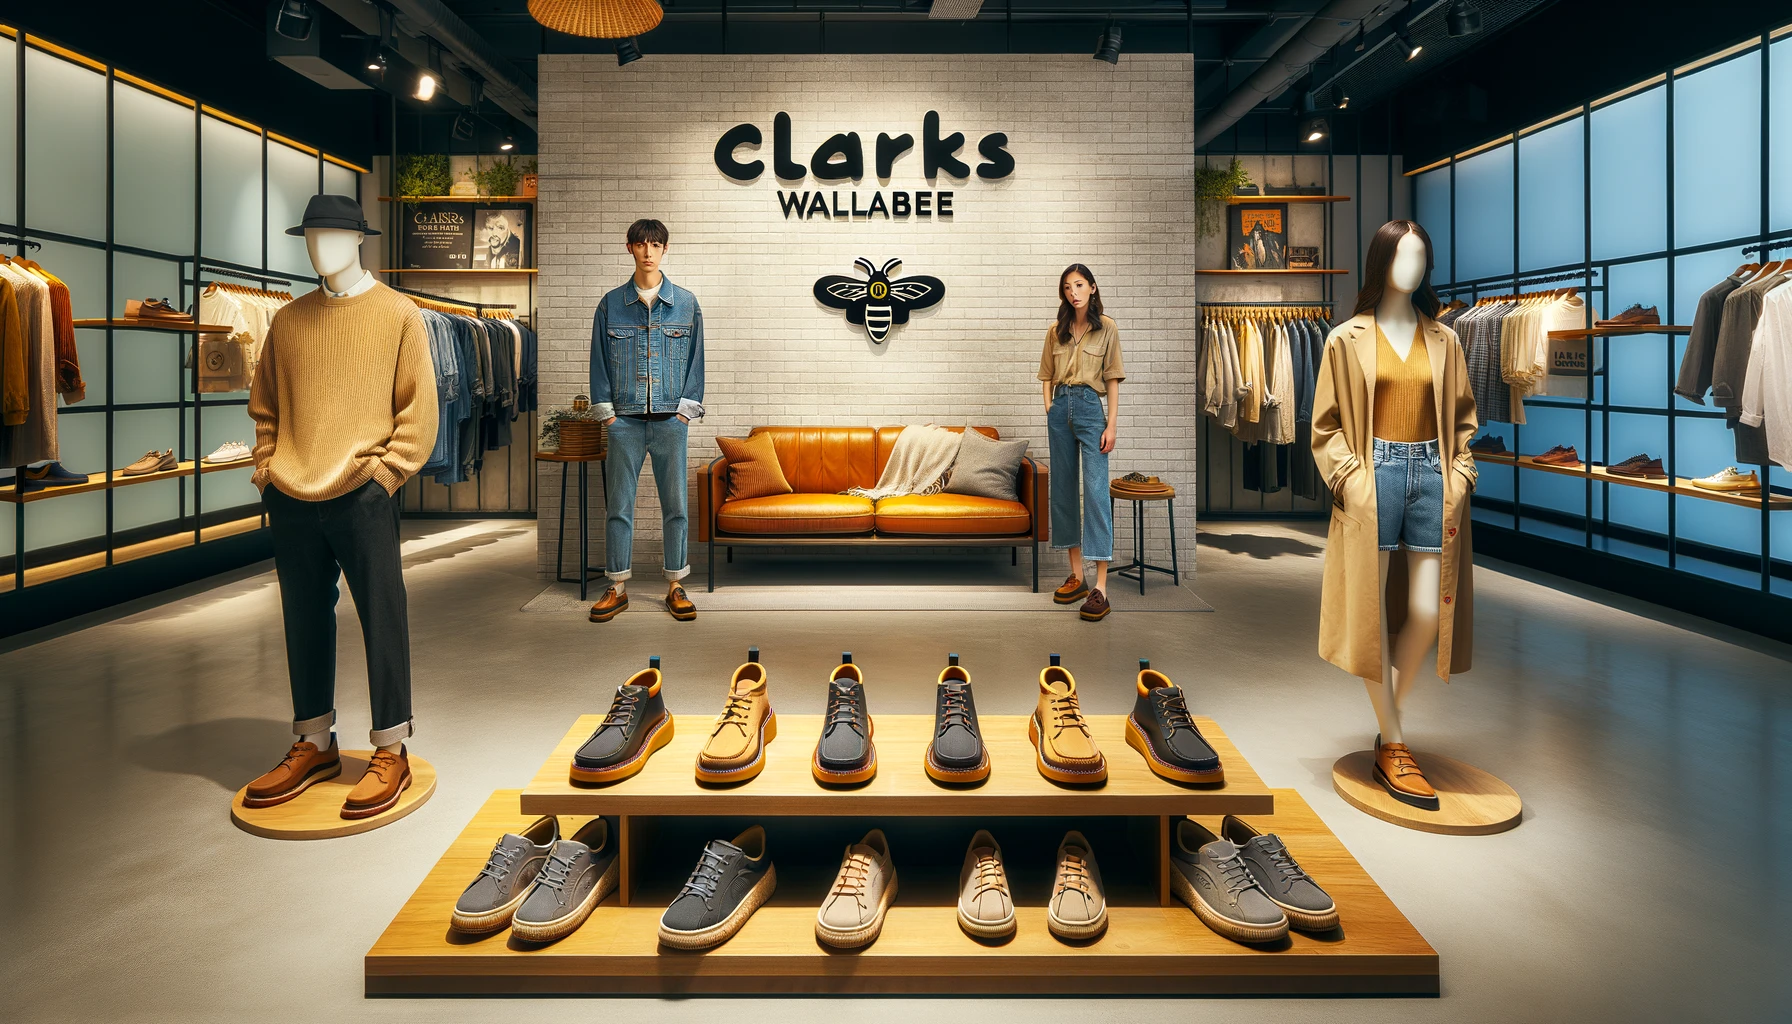 An image showcasing the men's and women's lineup of Clarks Wallabee shoes. The setting is a trendy urban clothing store with both men's and women's Wallabee shoes displayed on opposite sides. The men's shoes are styled with casual outfits, while the women's shoes are paired with more elegant attire. The background features minimalist decor, focusing on the shoes and the outfits. The Clarks logo is prominently displayed above the display, symbolizing brand identity. The image conveys a versatile appeal of the Wallabee collection for both genders.